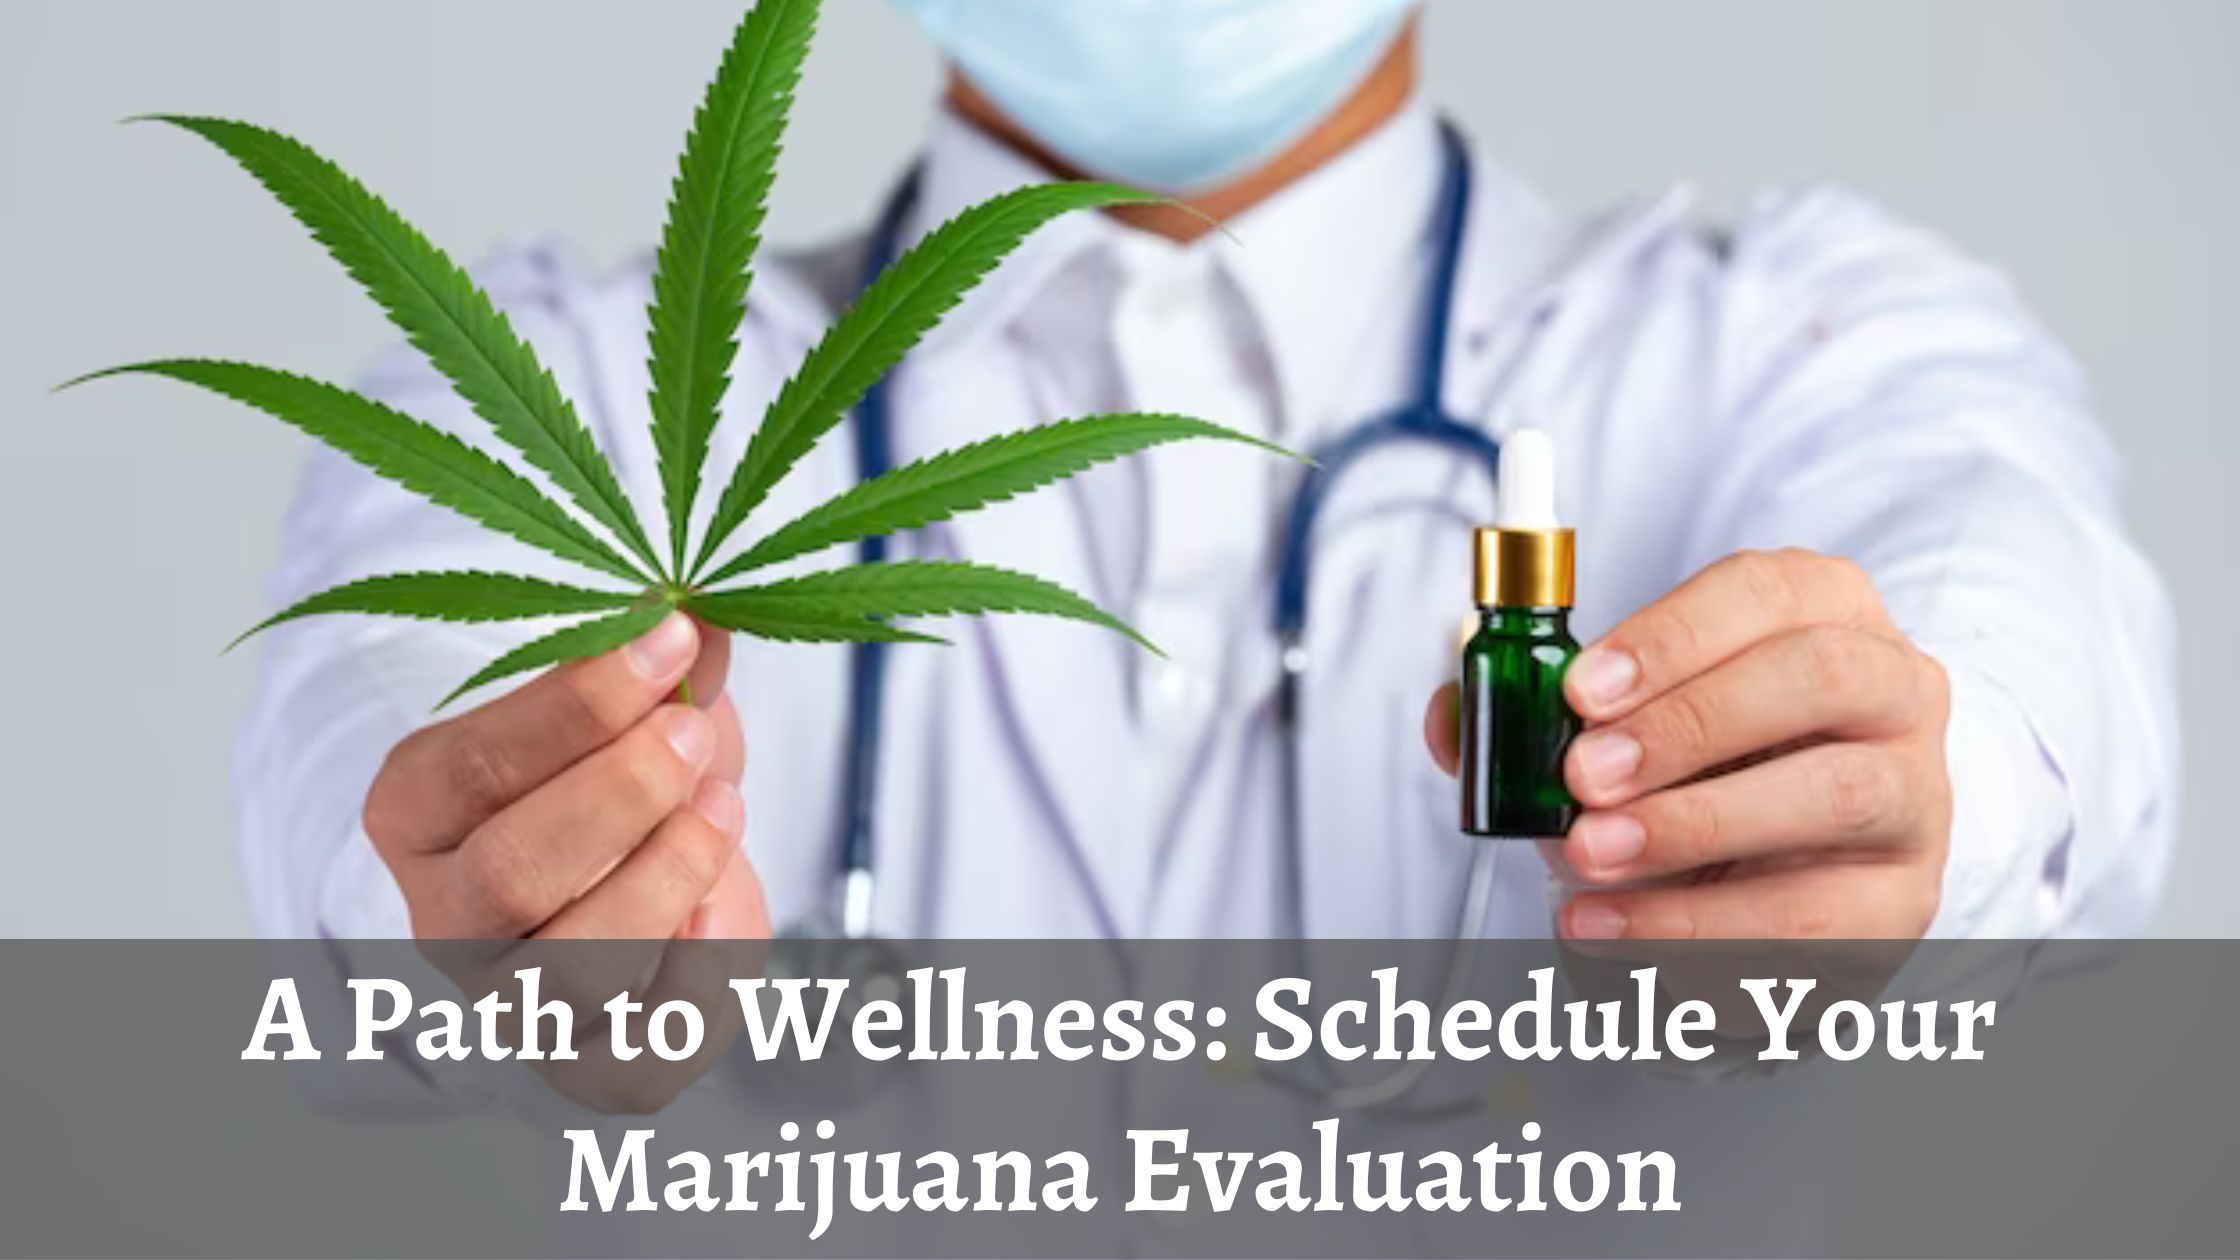 A Path to Wellness: Schedule Your Marijuana Evaluation